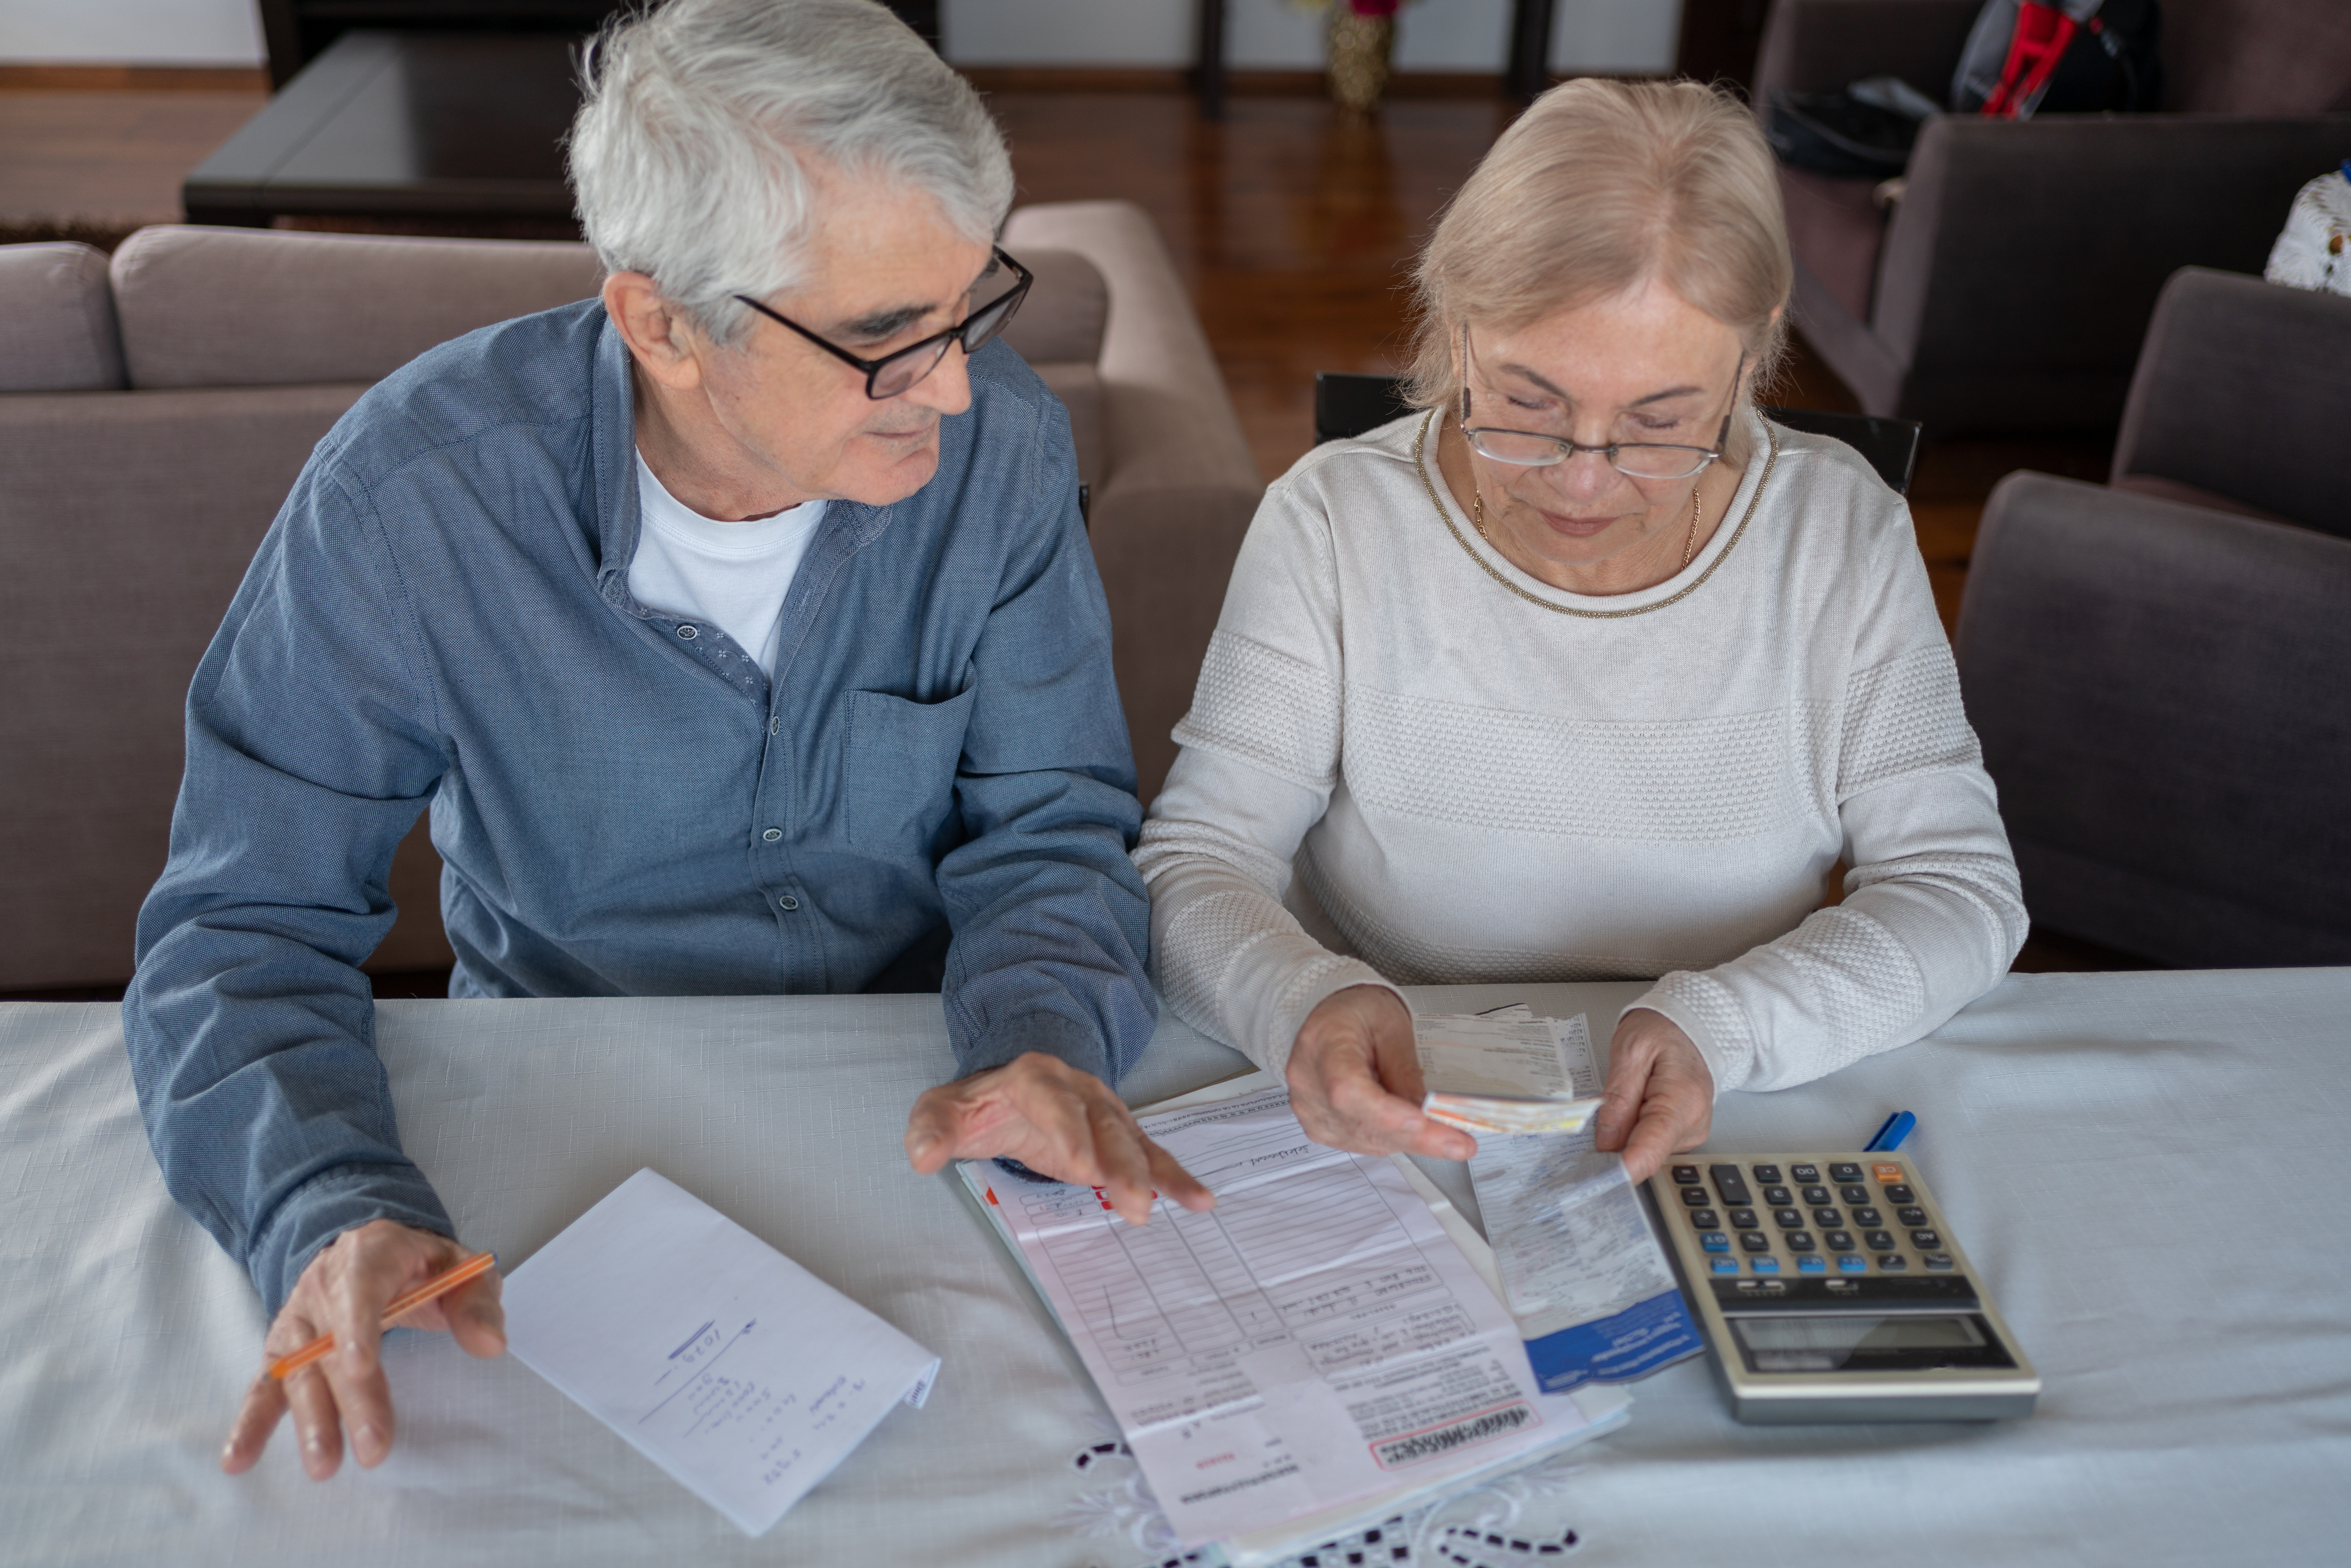 Two elderly individuals reviewing documents at a table, with calculator and medications nearby